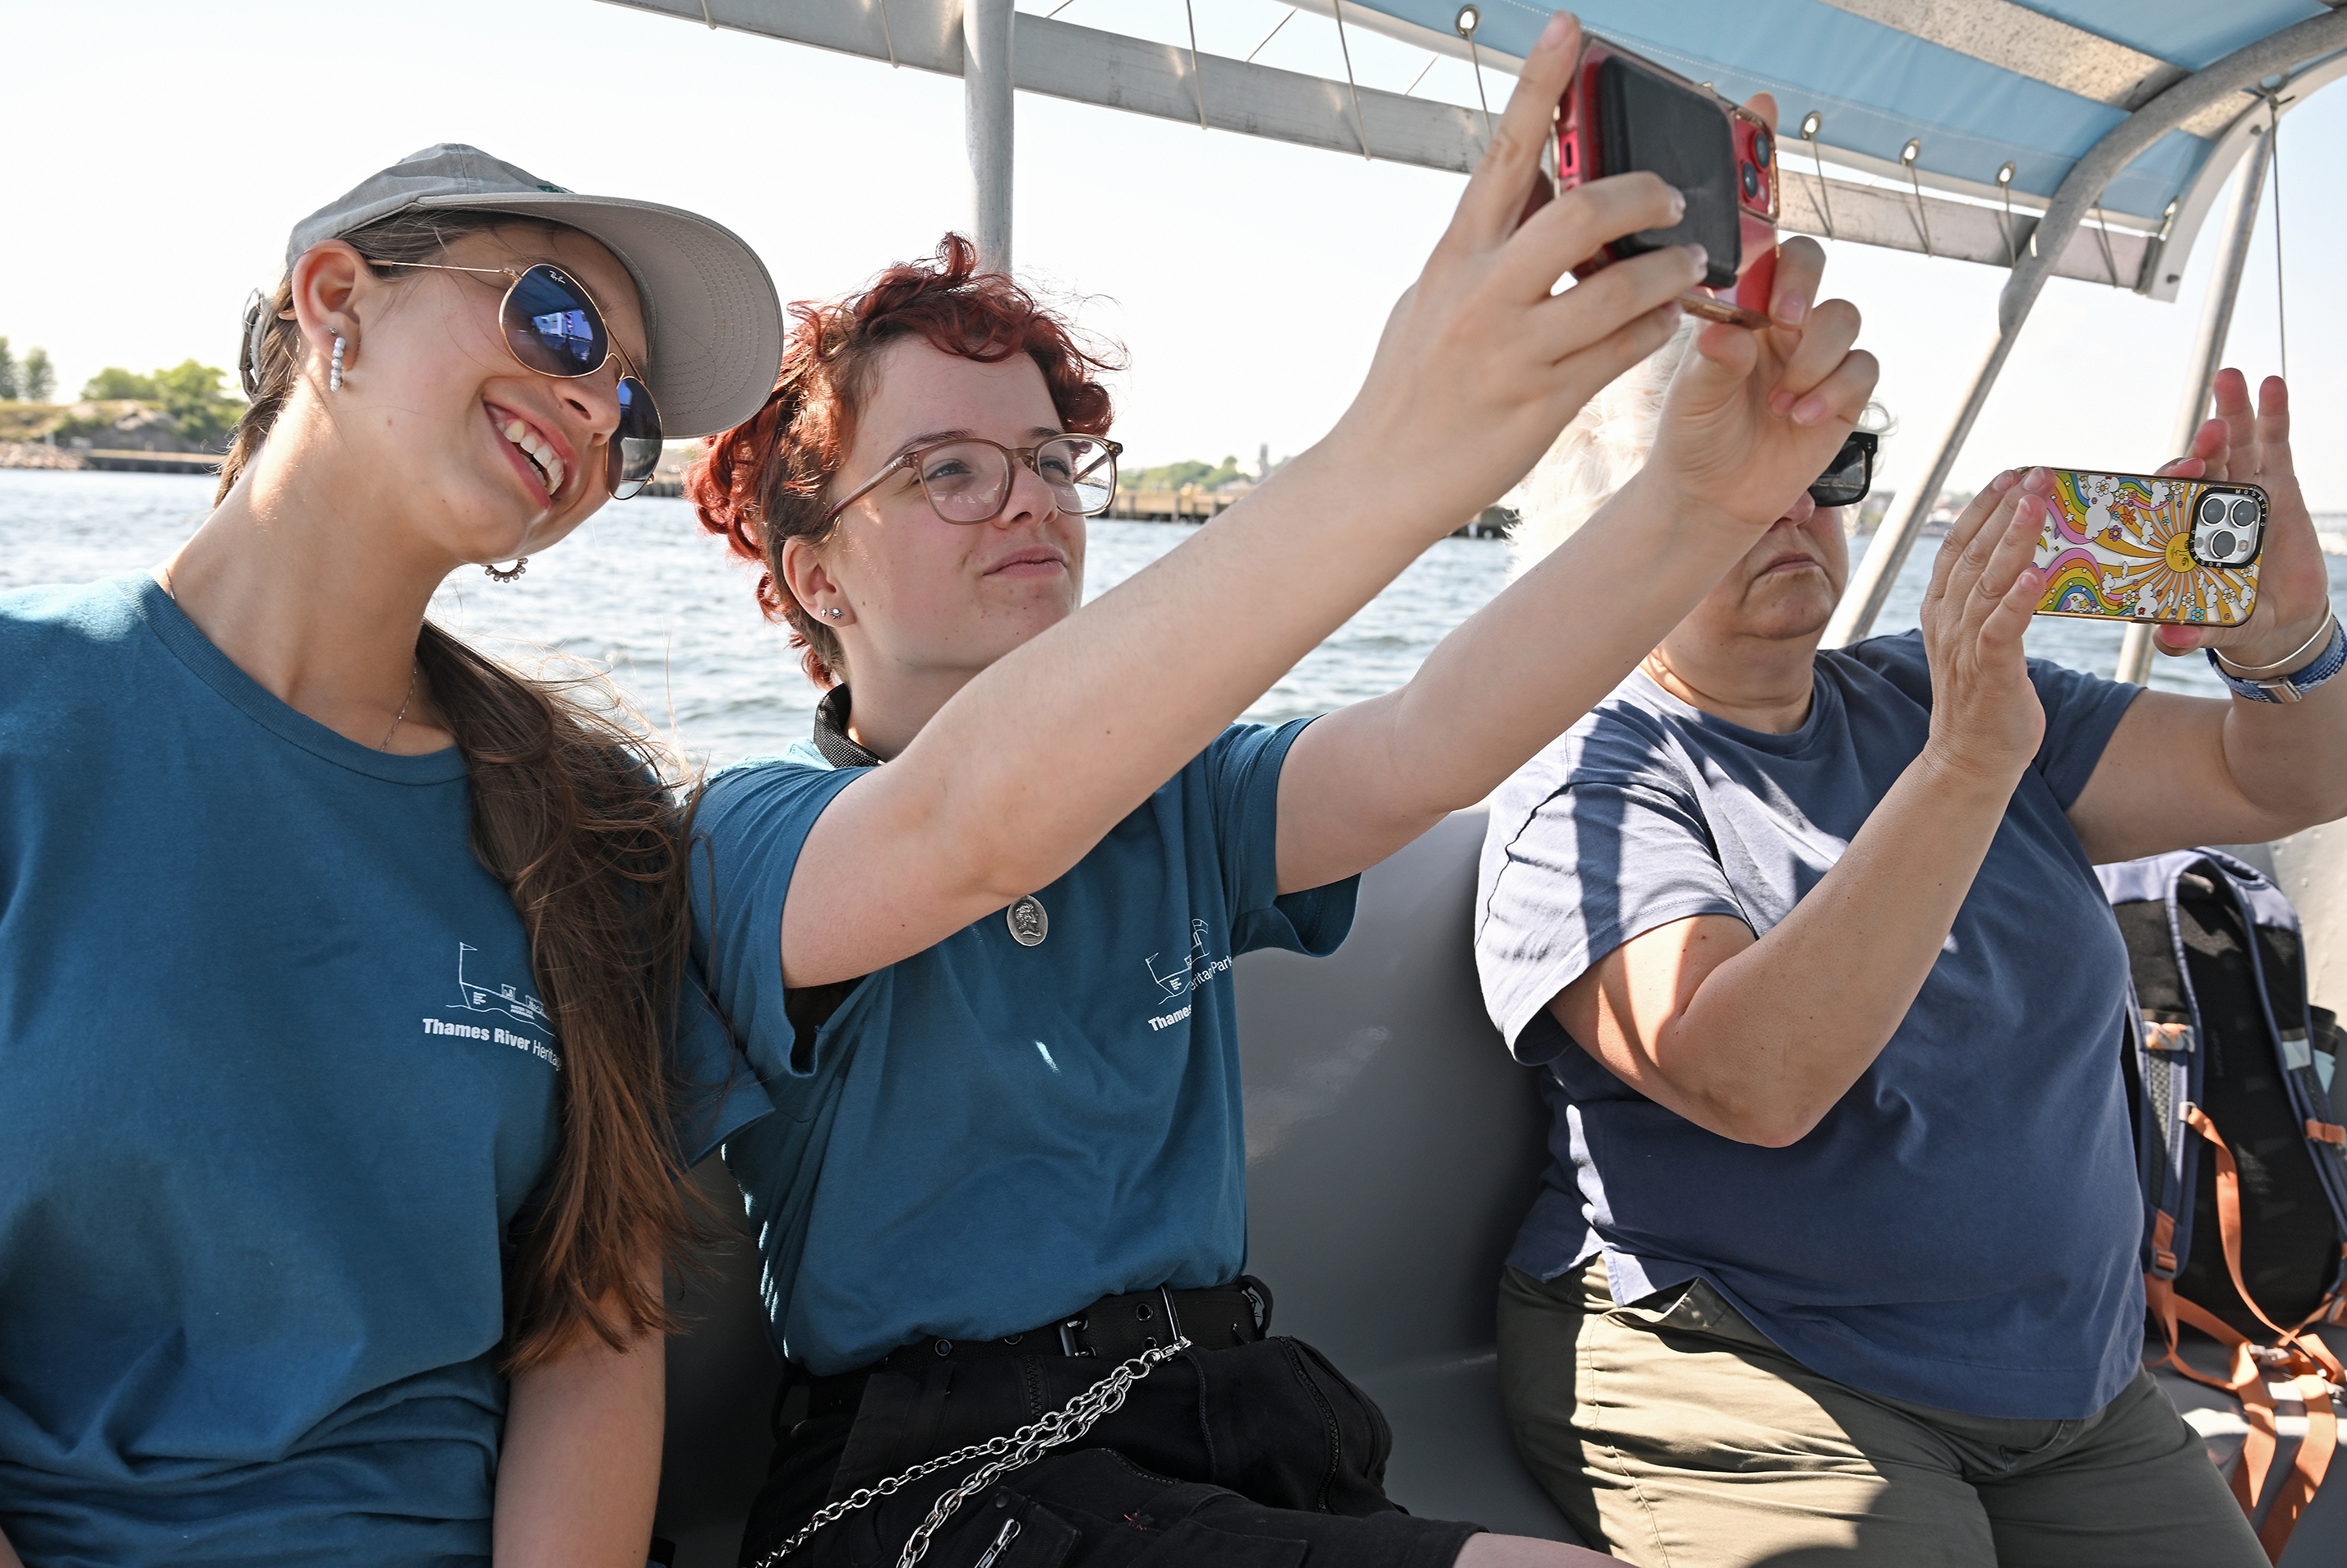 two students take a photo together while riding in a boat.